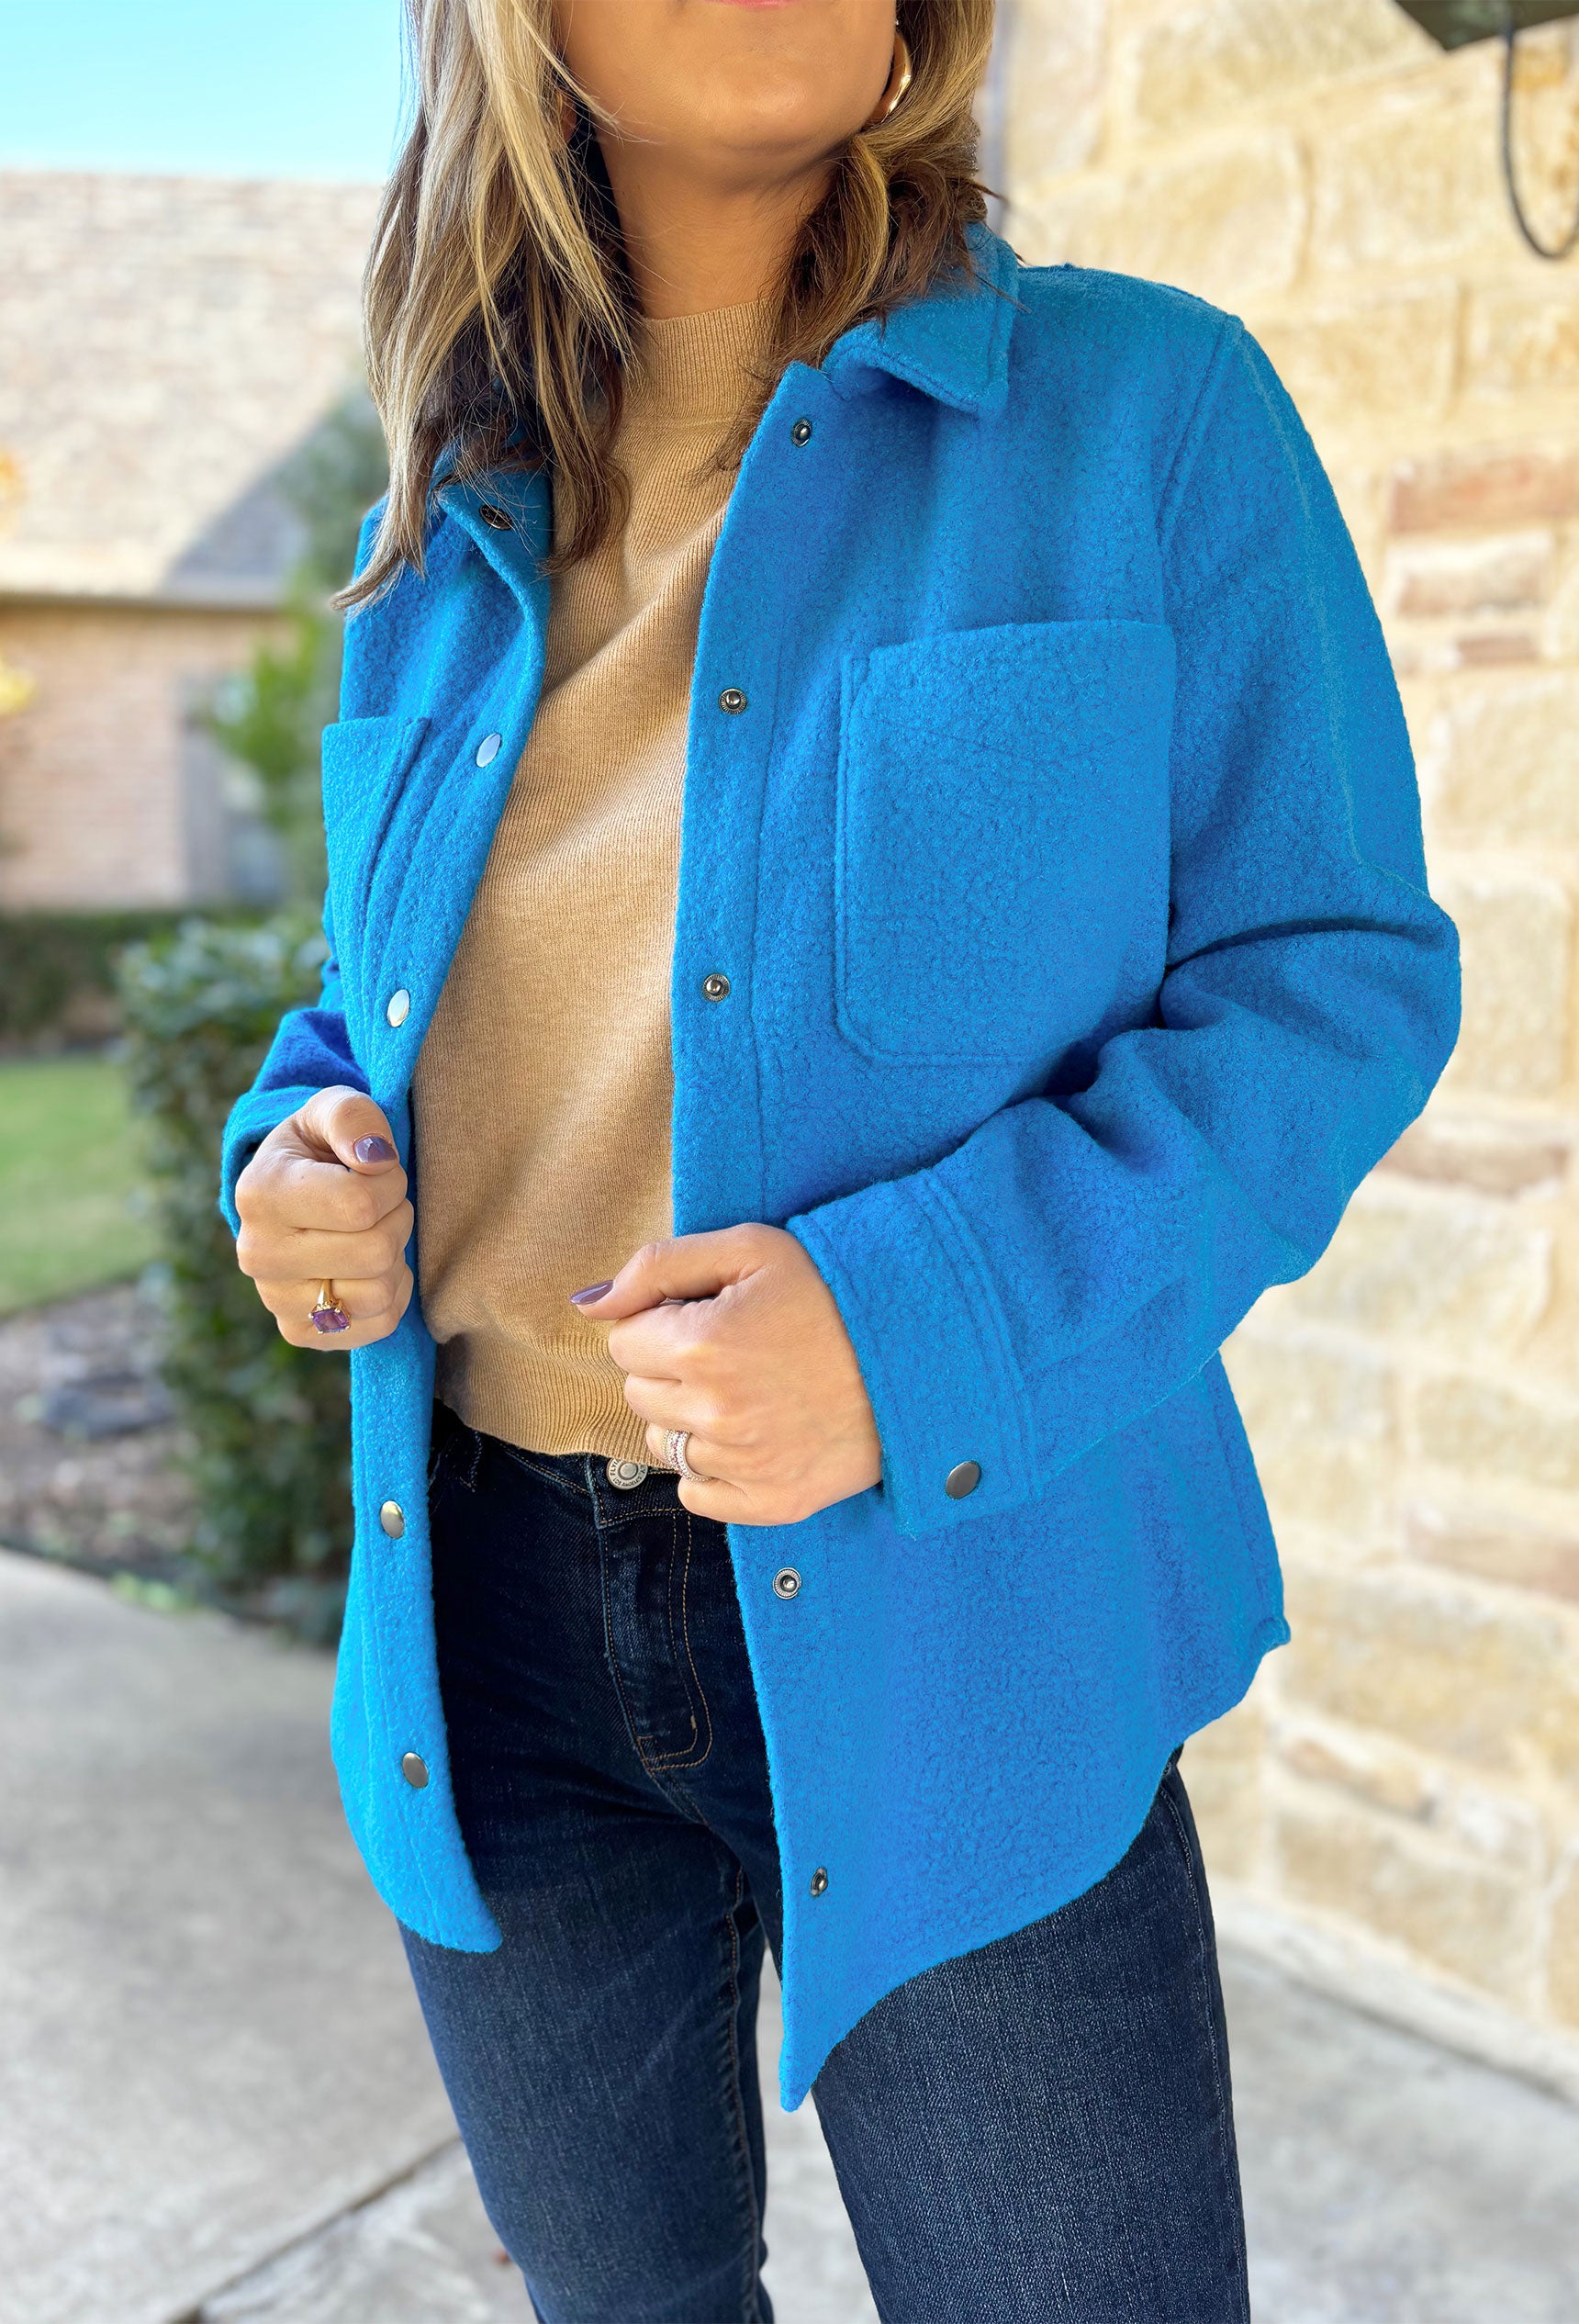 Snow Angel Jacket, electric blue wool blend coat with snap buttons and two front pockets on the chest